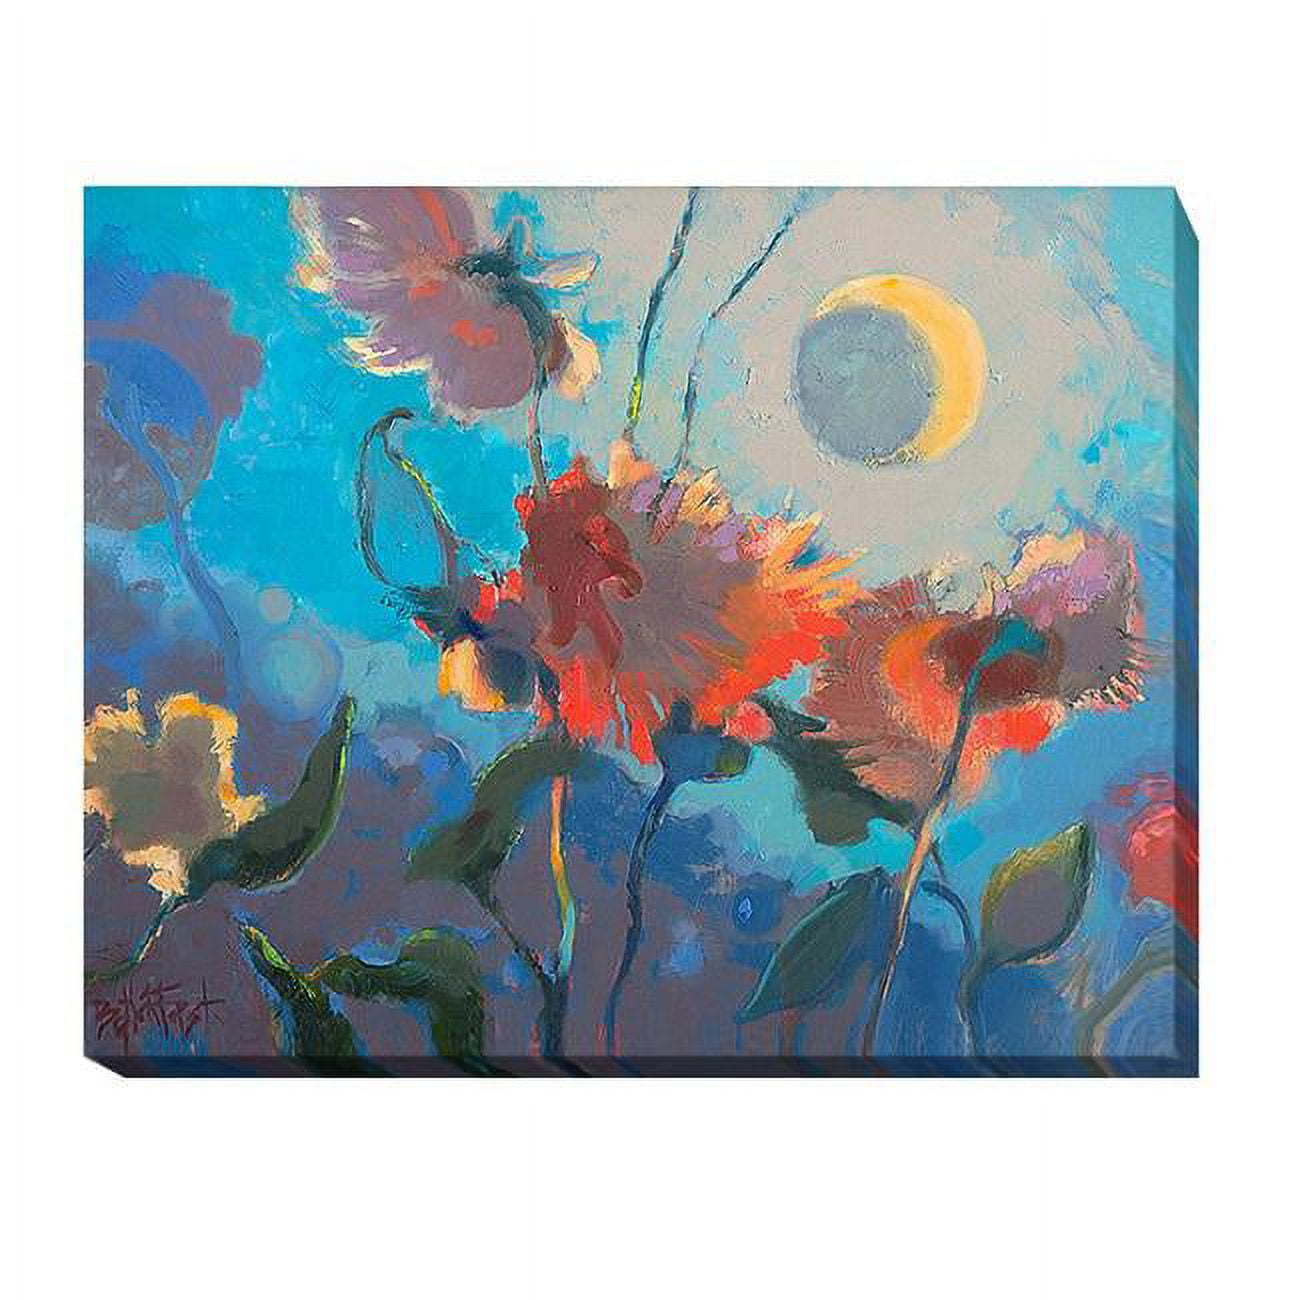 1620j884ig Dahlia Moonglow By Beth A Forst Premium Gallery-wrapped Canvas Giclee Art - Ready-to-hang, 16 X 20 X 1.5 In.